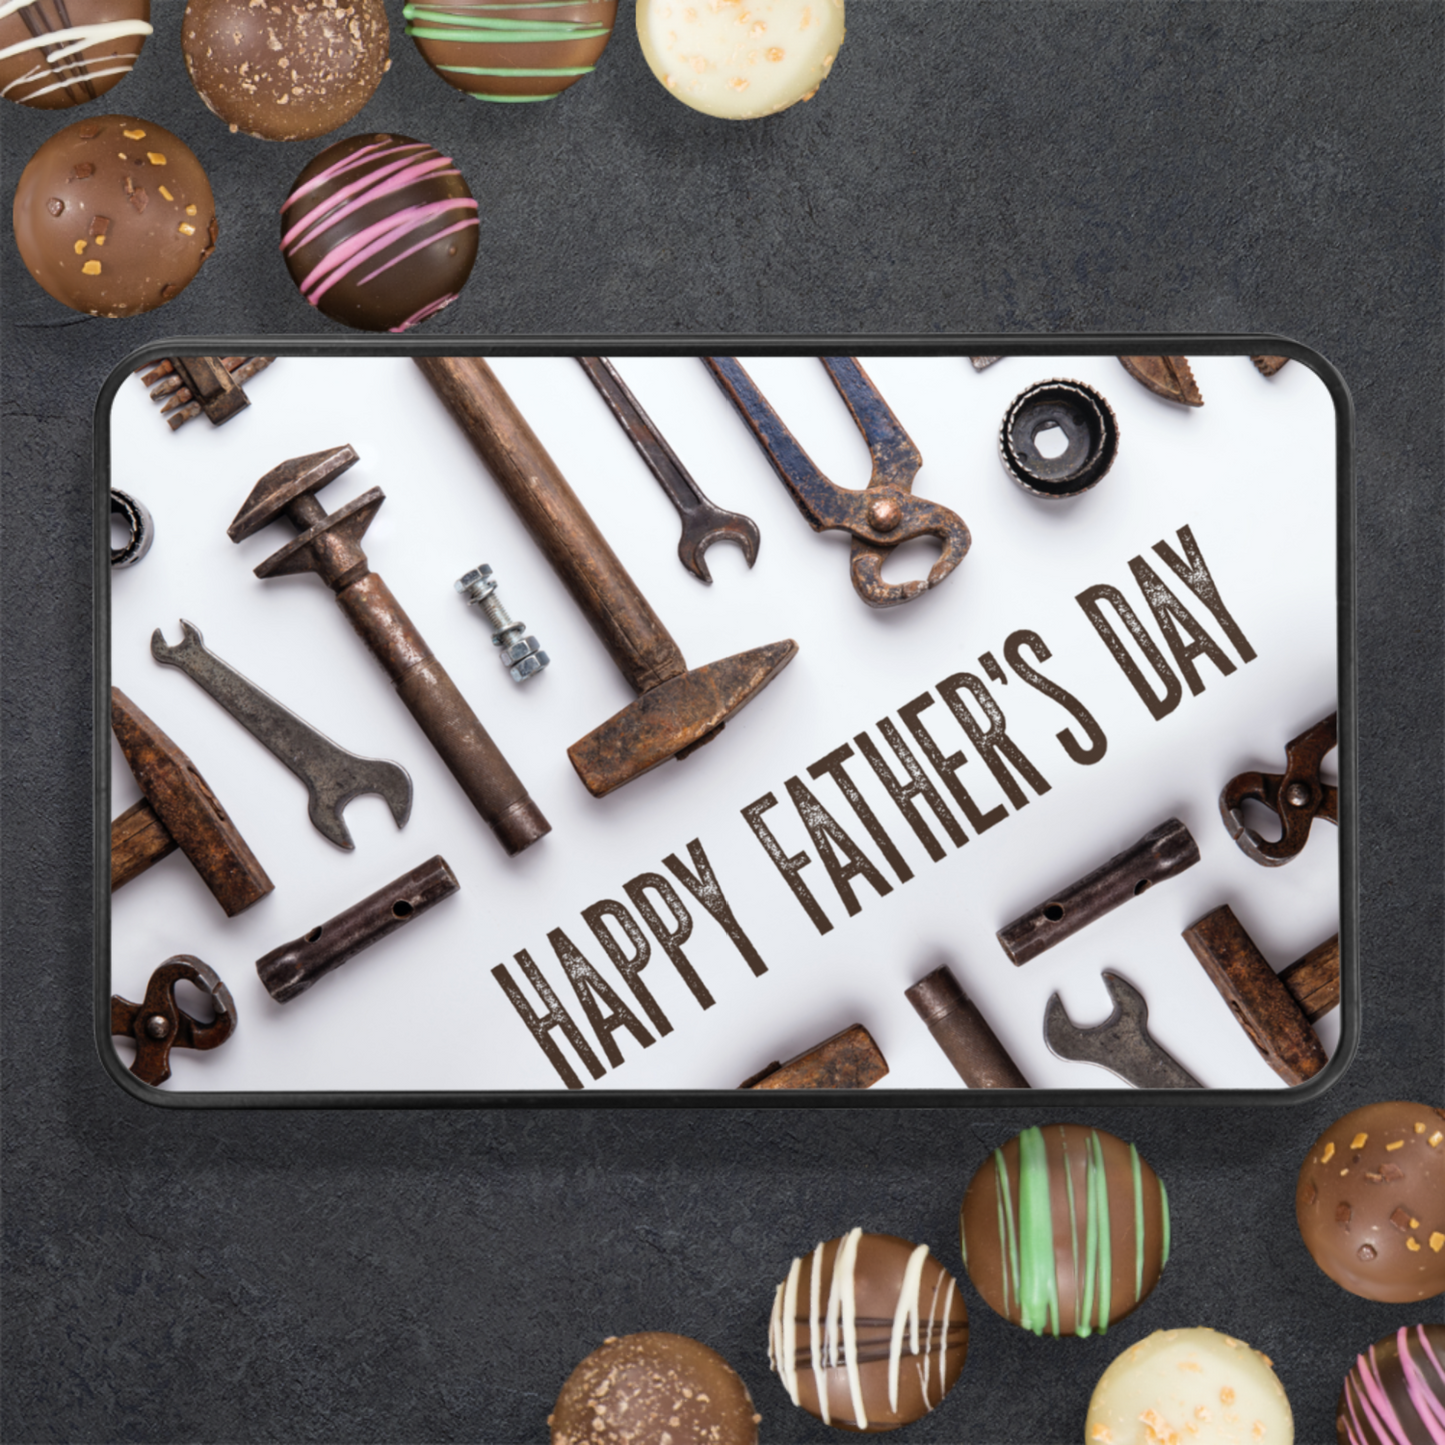 Fathers Day Chocolate Gift Box - Chocolate Truffles For Dad - Fathers Day Gift From Daughter